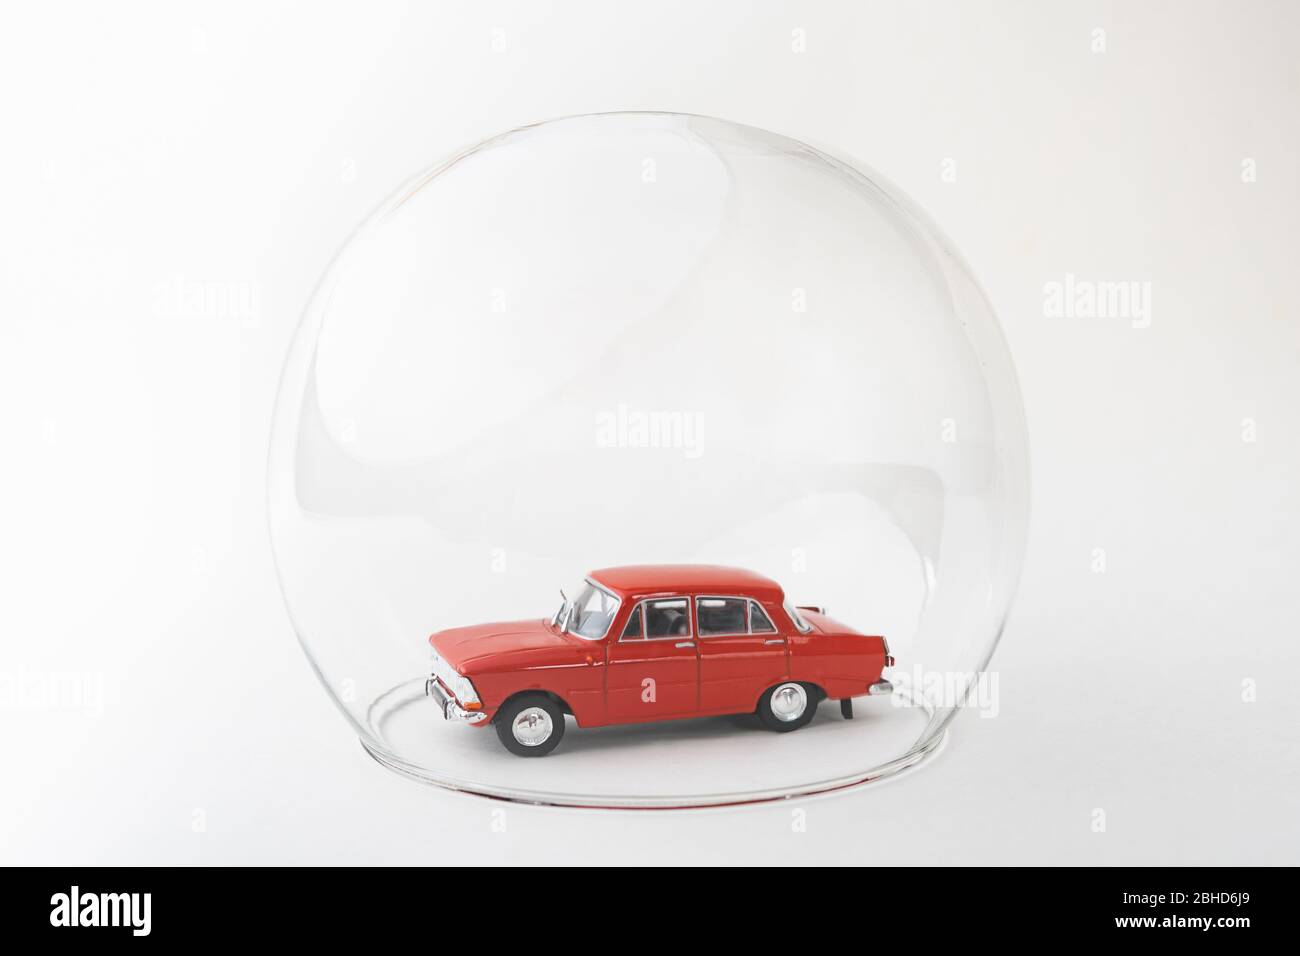 Red toy car inside a glass ball. Conceptual image of insurance coverage and safety protection. Stock Photo